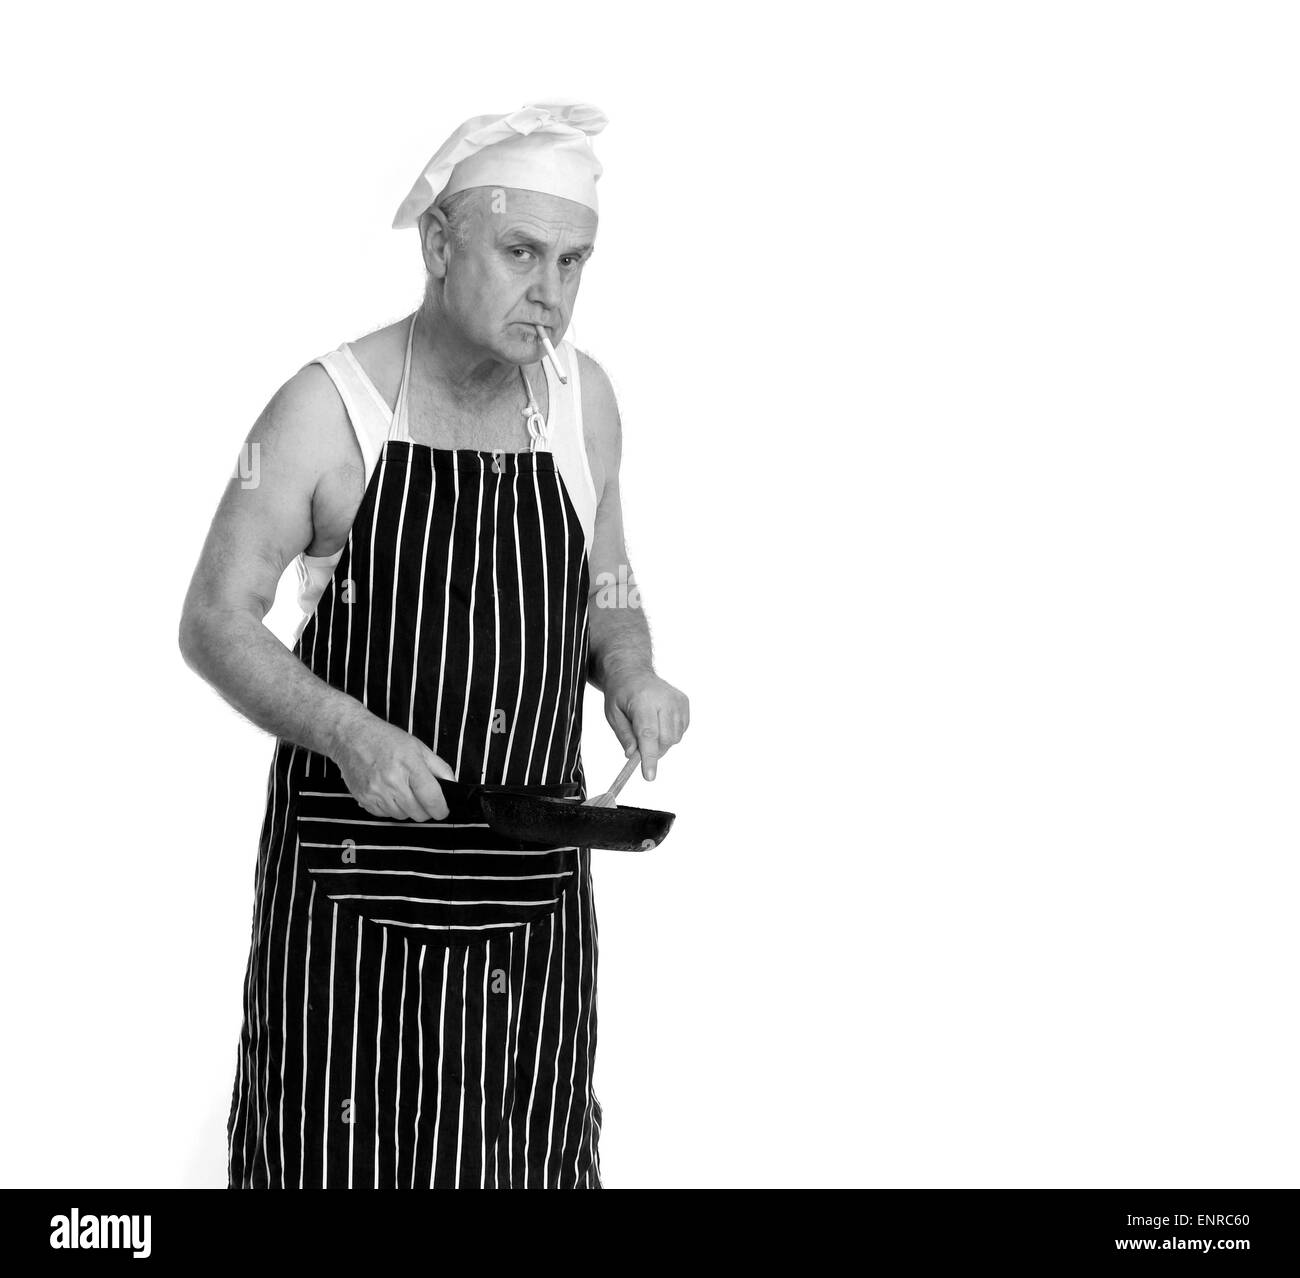 Man as a low grade chef or cook in a greasy spoon Cafe, smoking while he cooks. 24th April 2015 Stock Photo